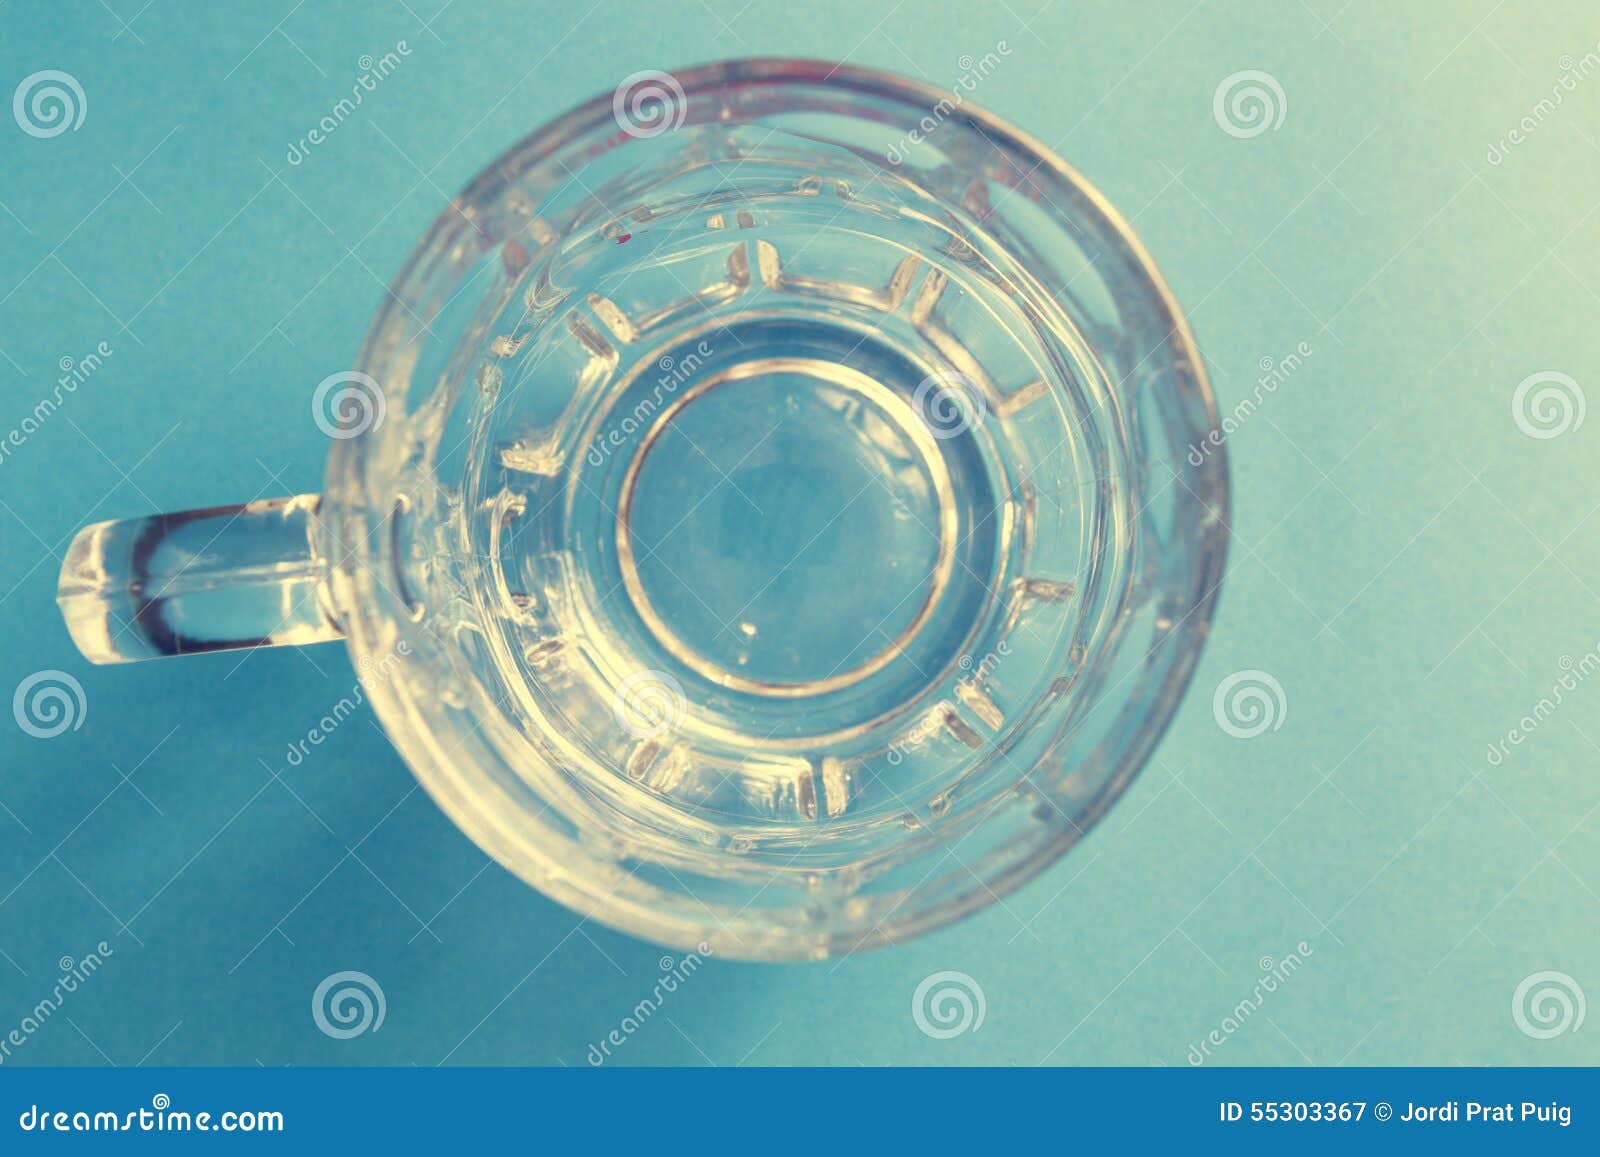 empty and transparent glass beer jar on a blue background